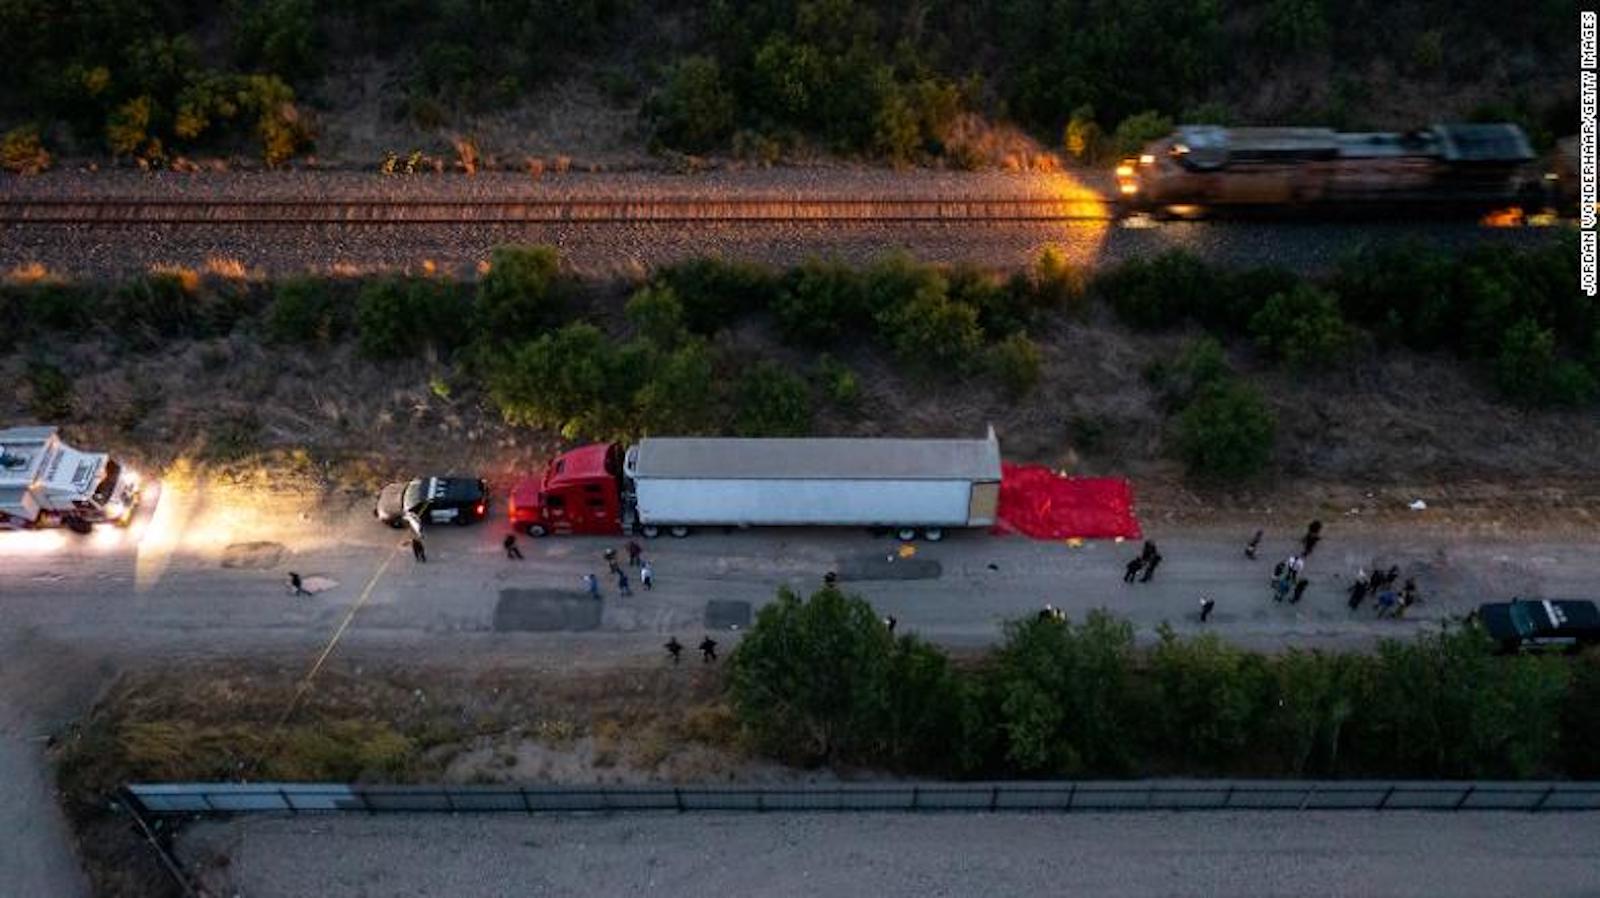 Two men indicted in connection with the deaths of 51 dead migrants found in a truck in San Antonio, Texas